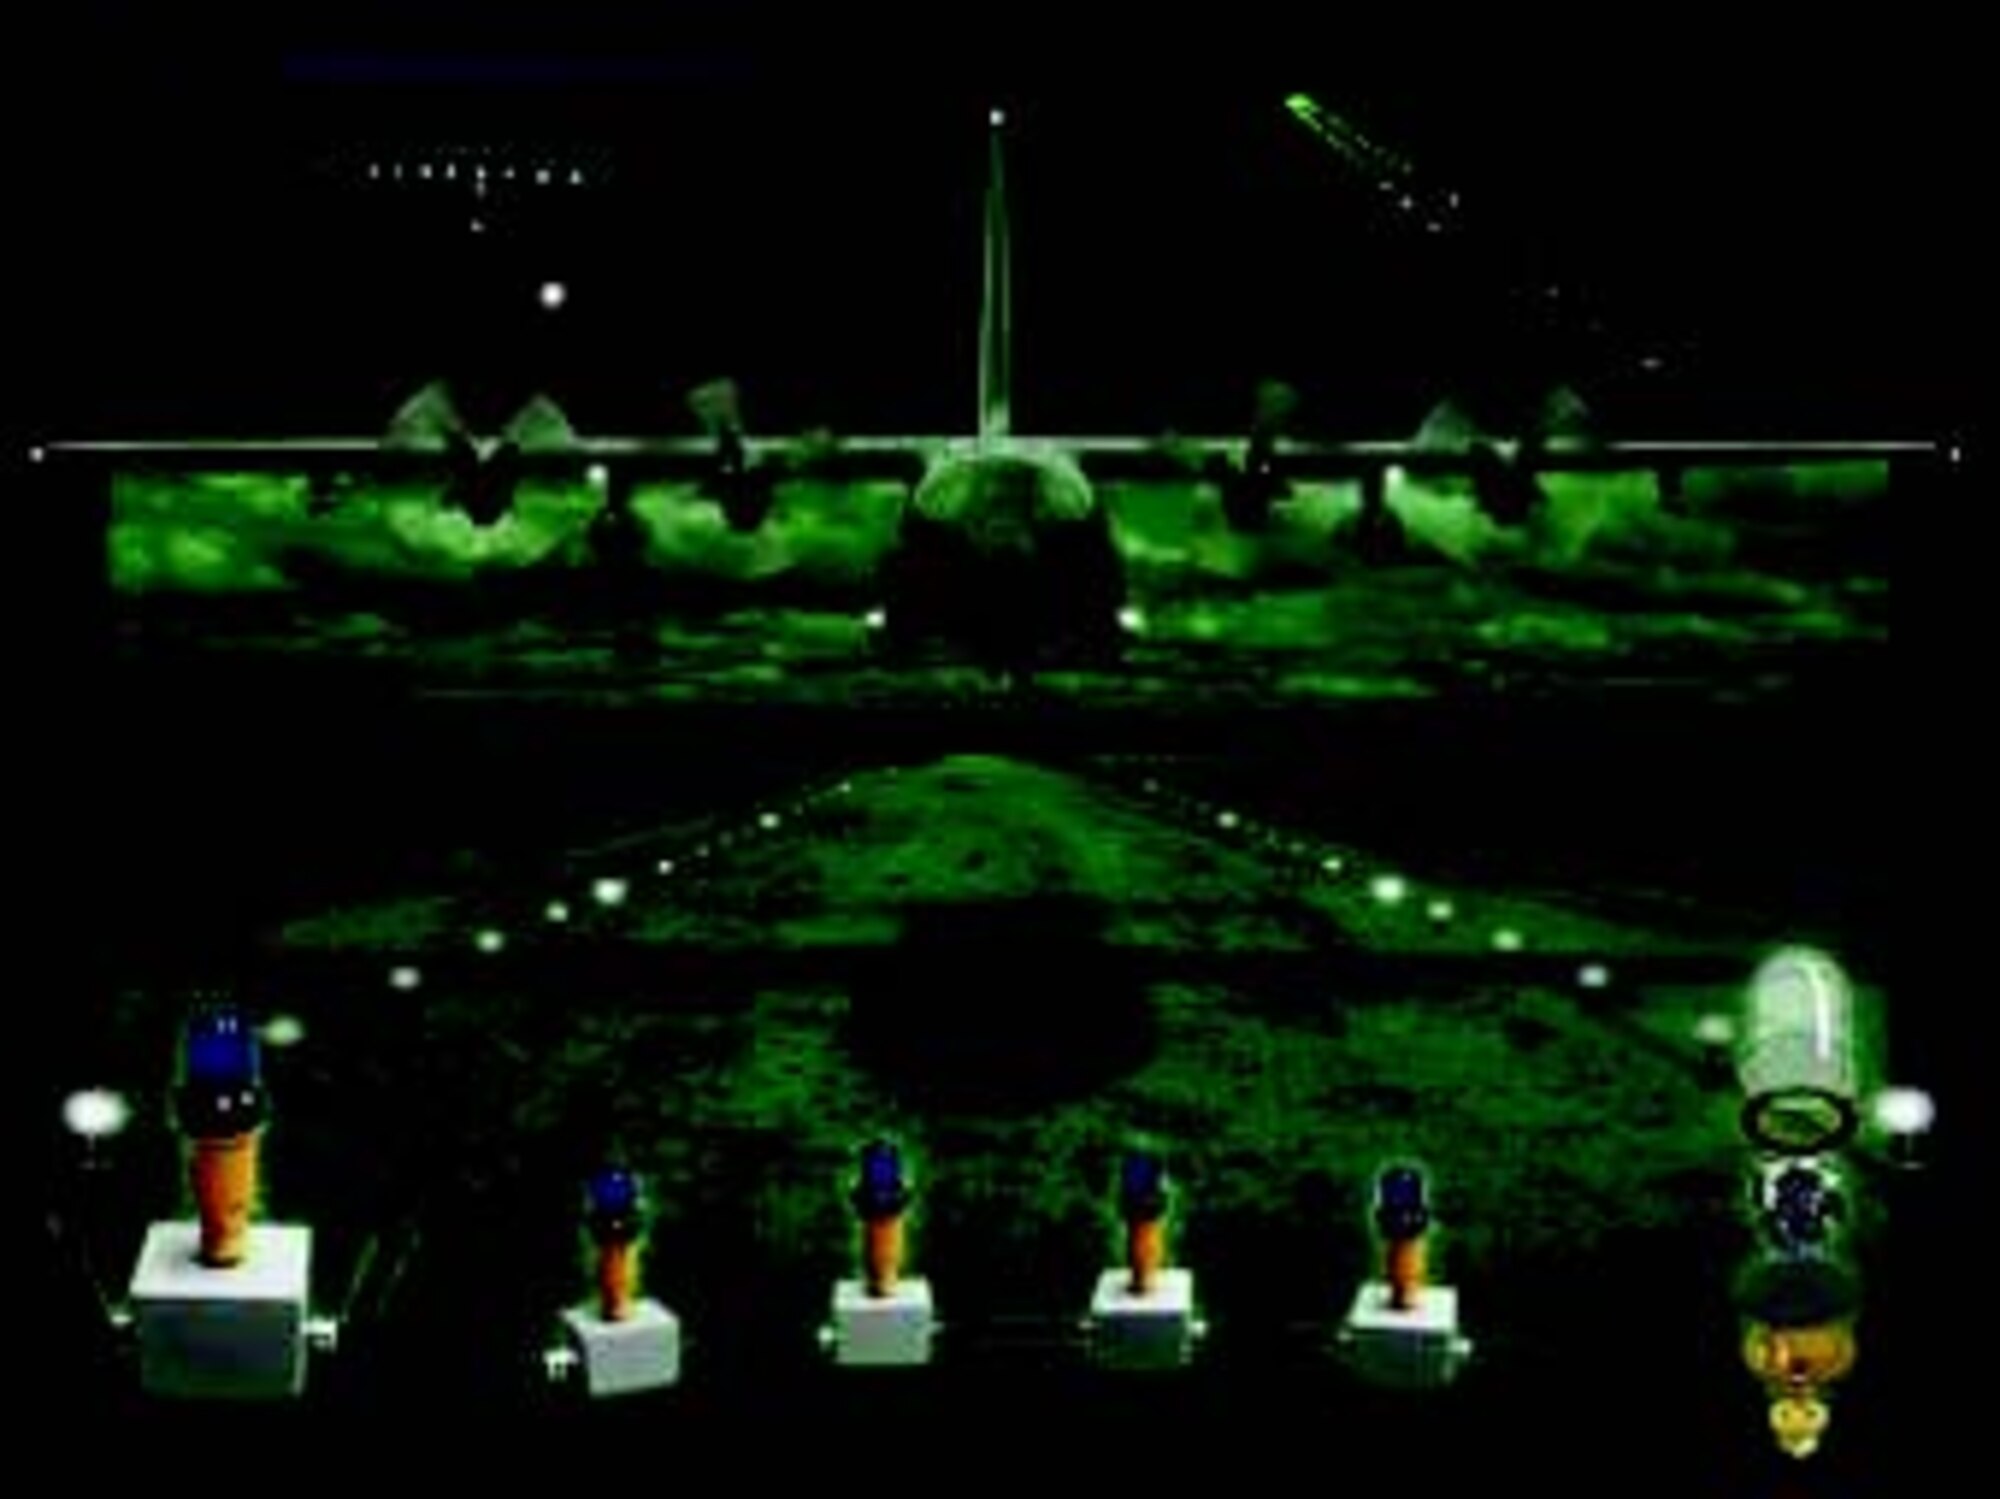 Portable airfield lighting system that uses light-emitting diodes and can be switched from visible to infrared light (graphic courtesy of Gary A. Rankin, AFRL Human Effectiveness Directorate)